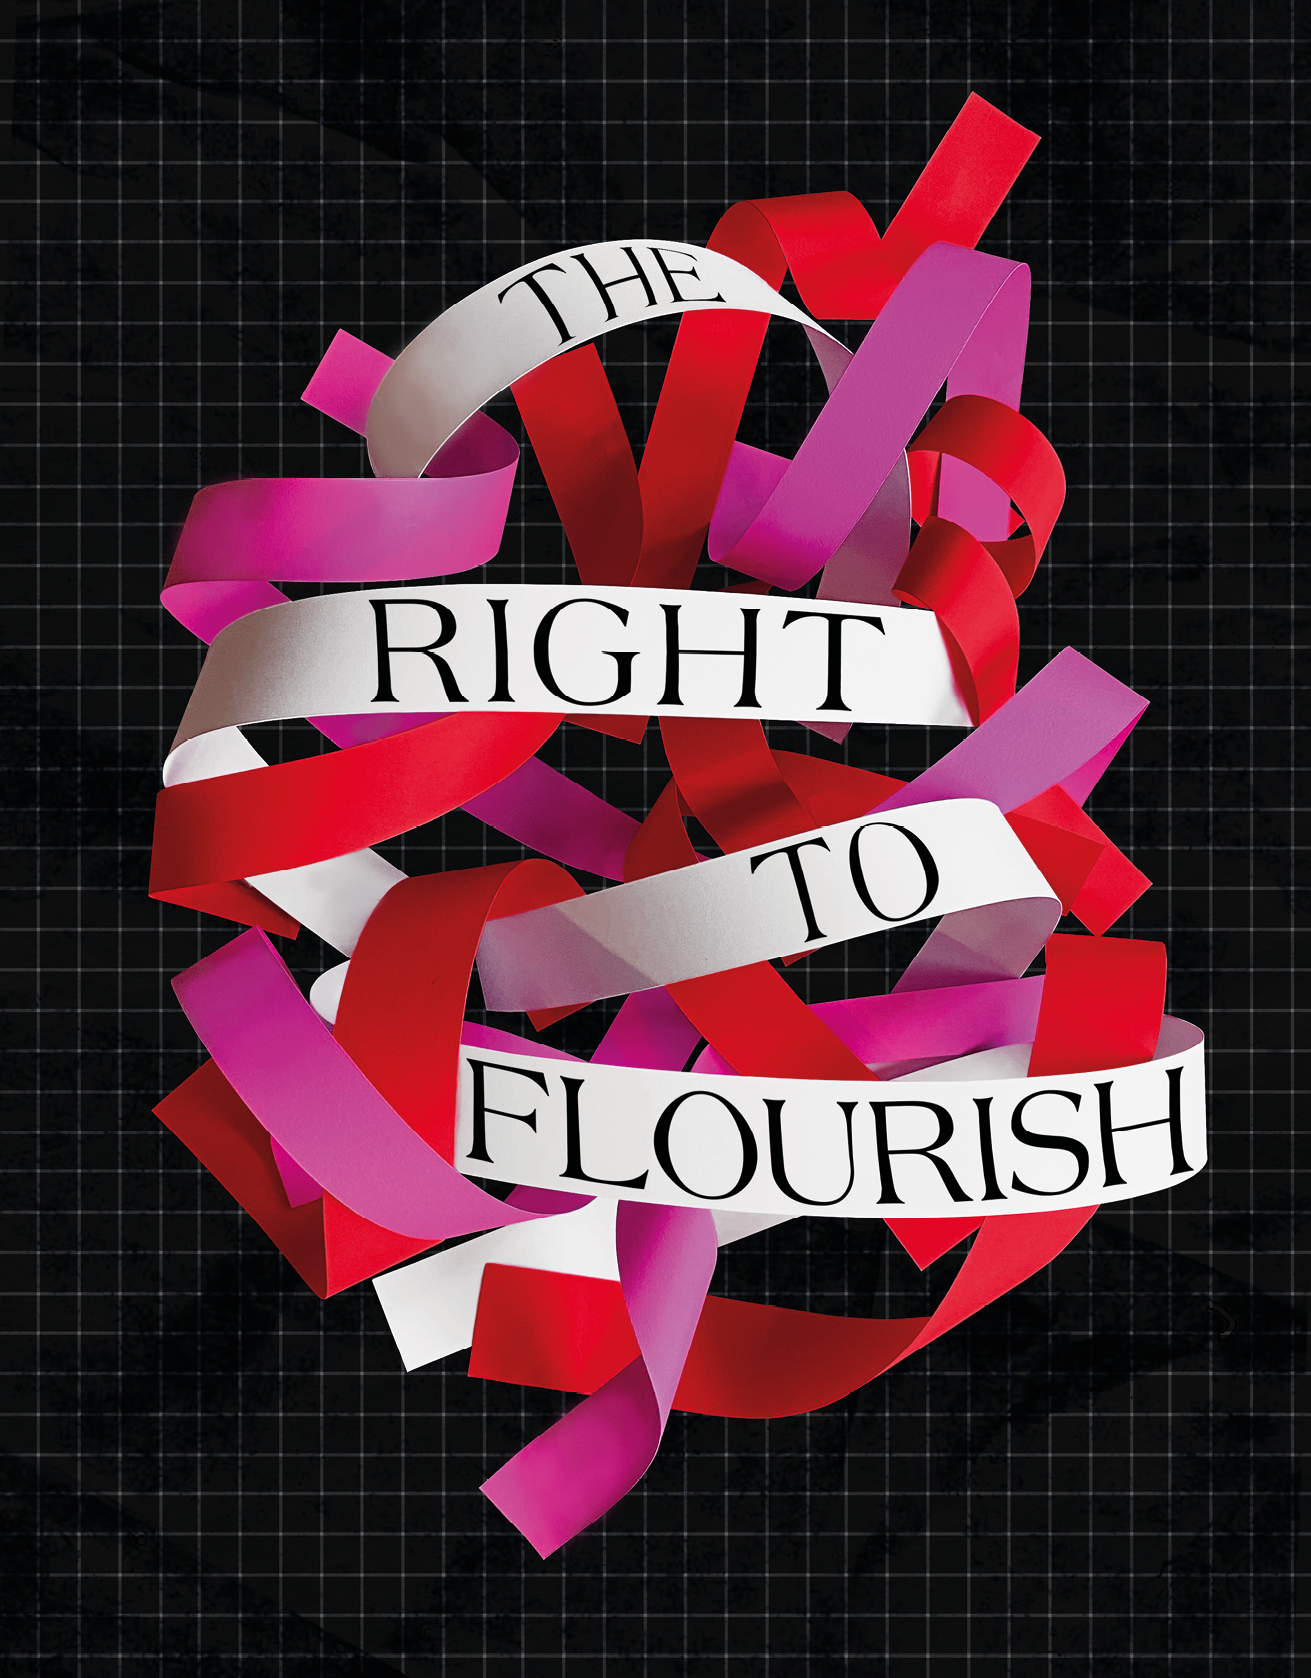 ‘The Right to Flourish’ by Niamh McArdle